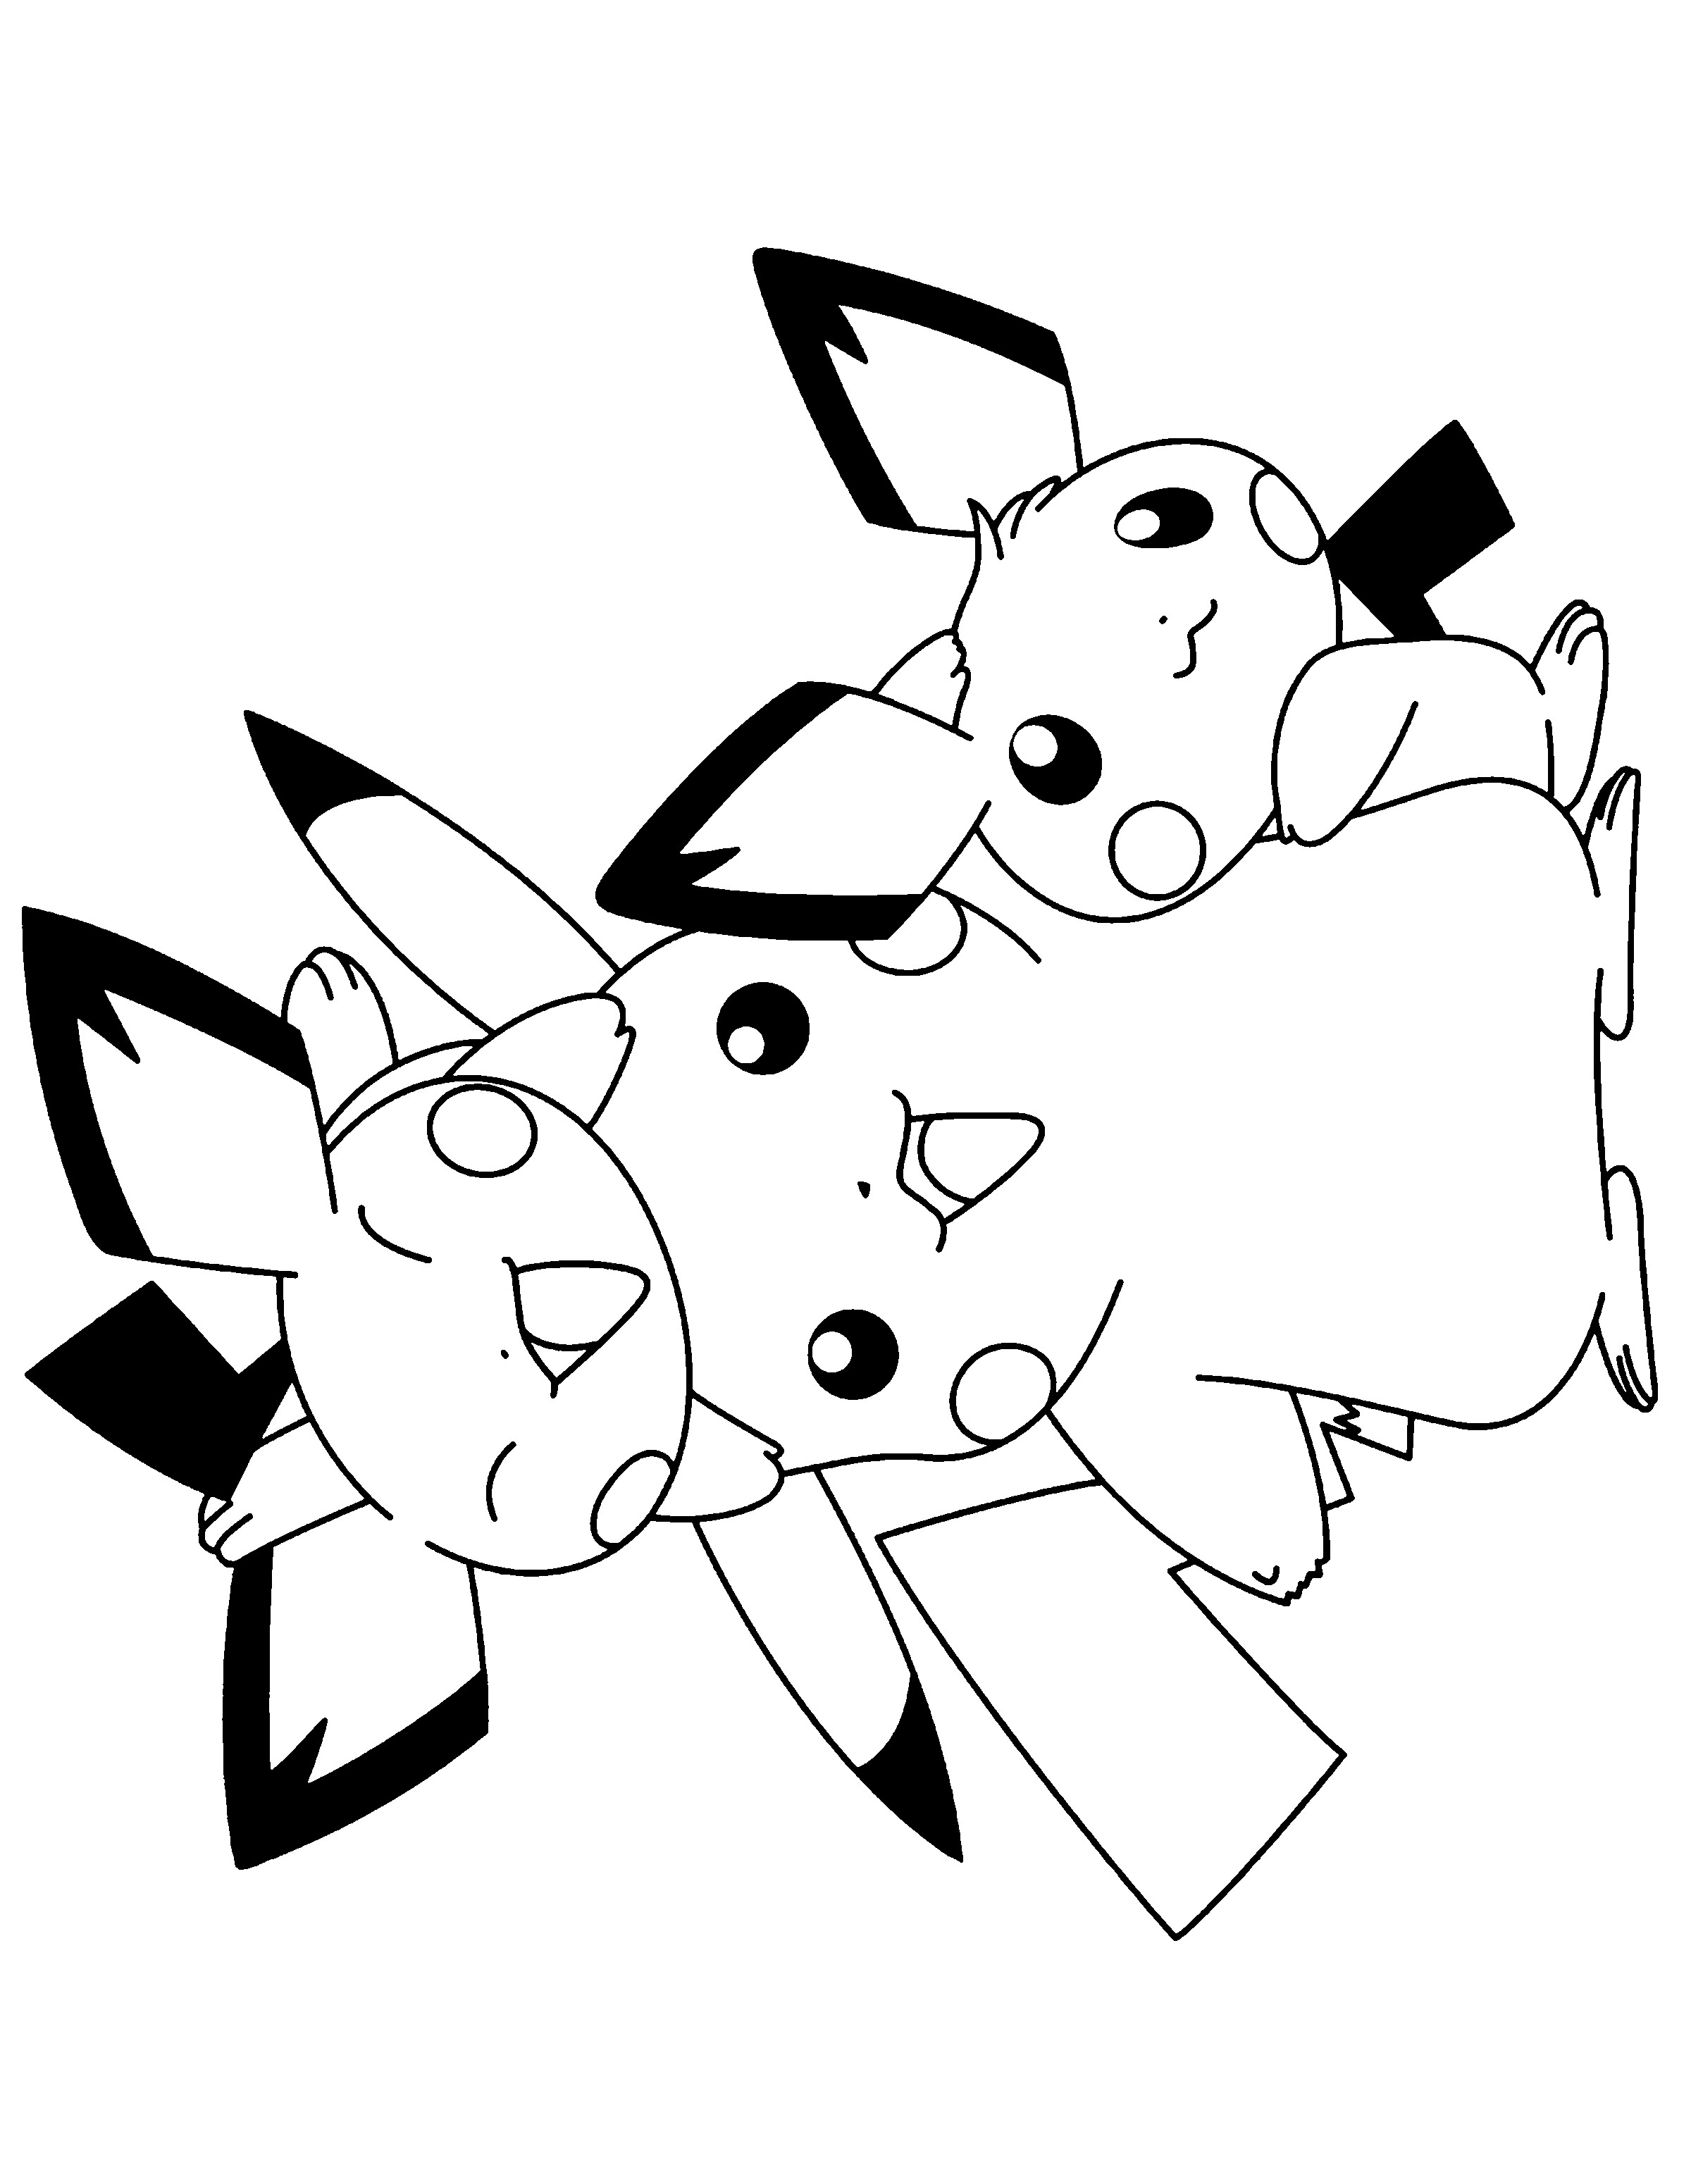 Pokemon Pichu Coloring Pages At GetColorings Free Printable Colorings Pages To Print And Color